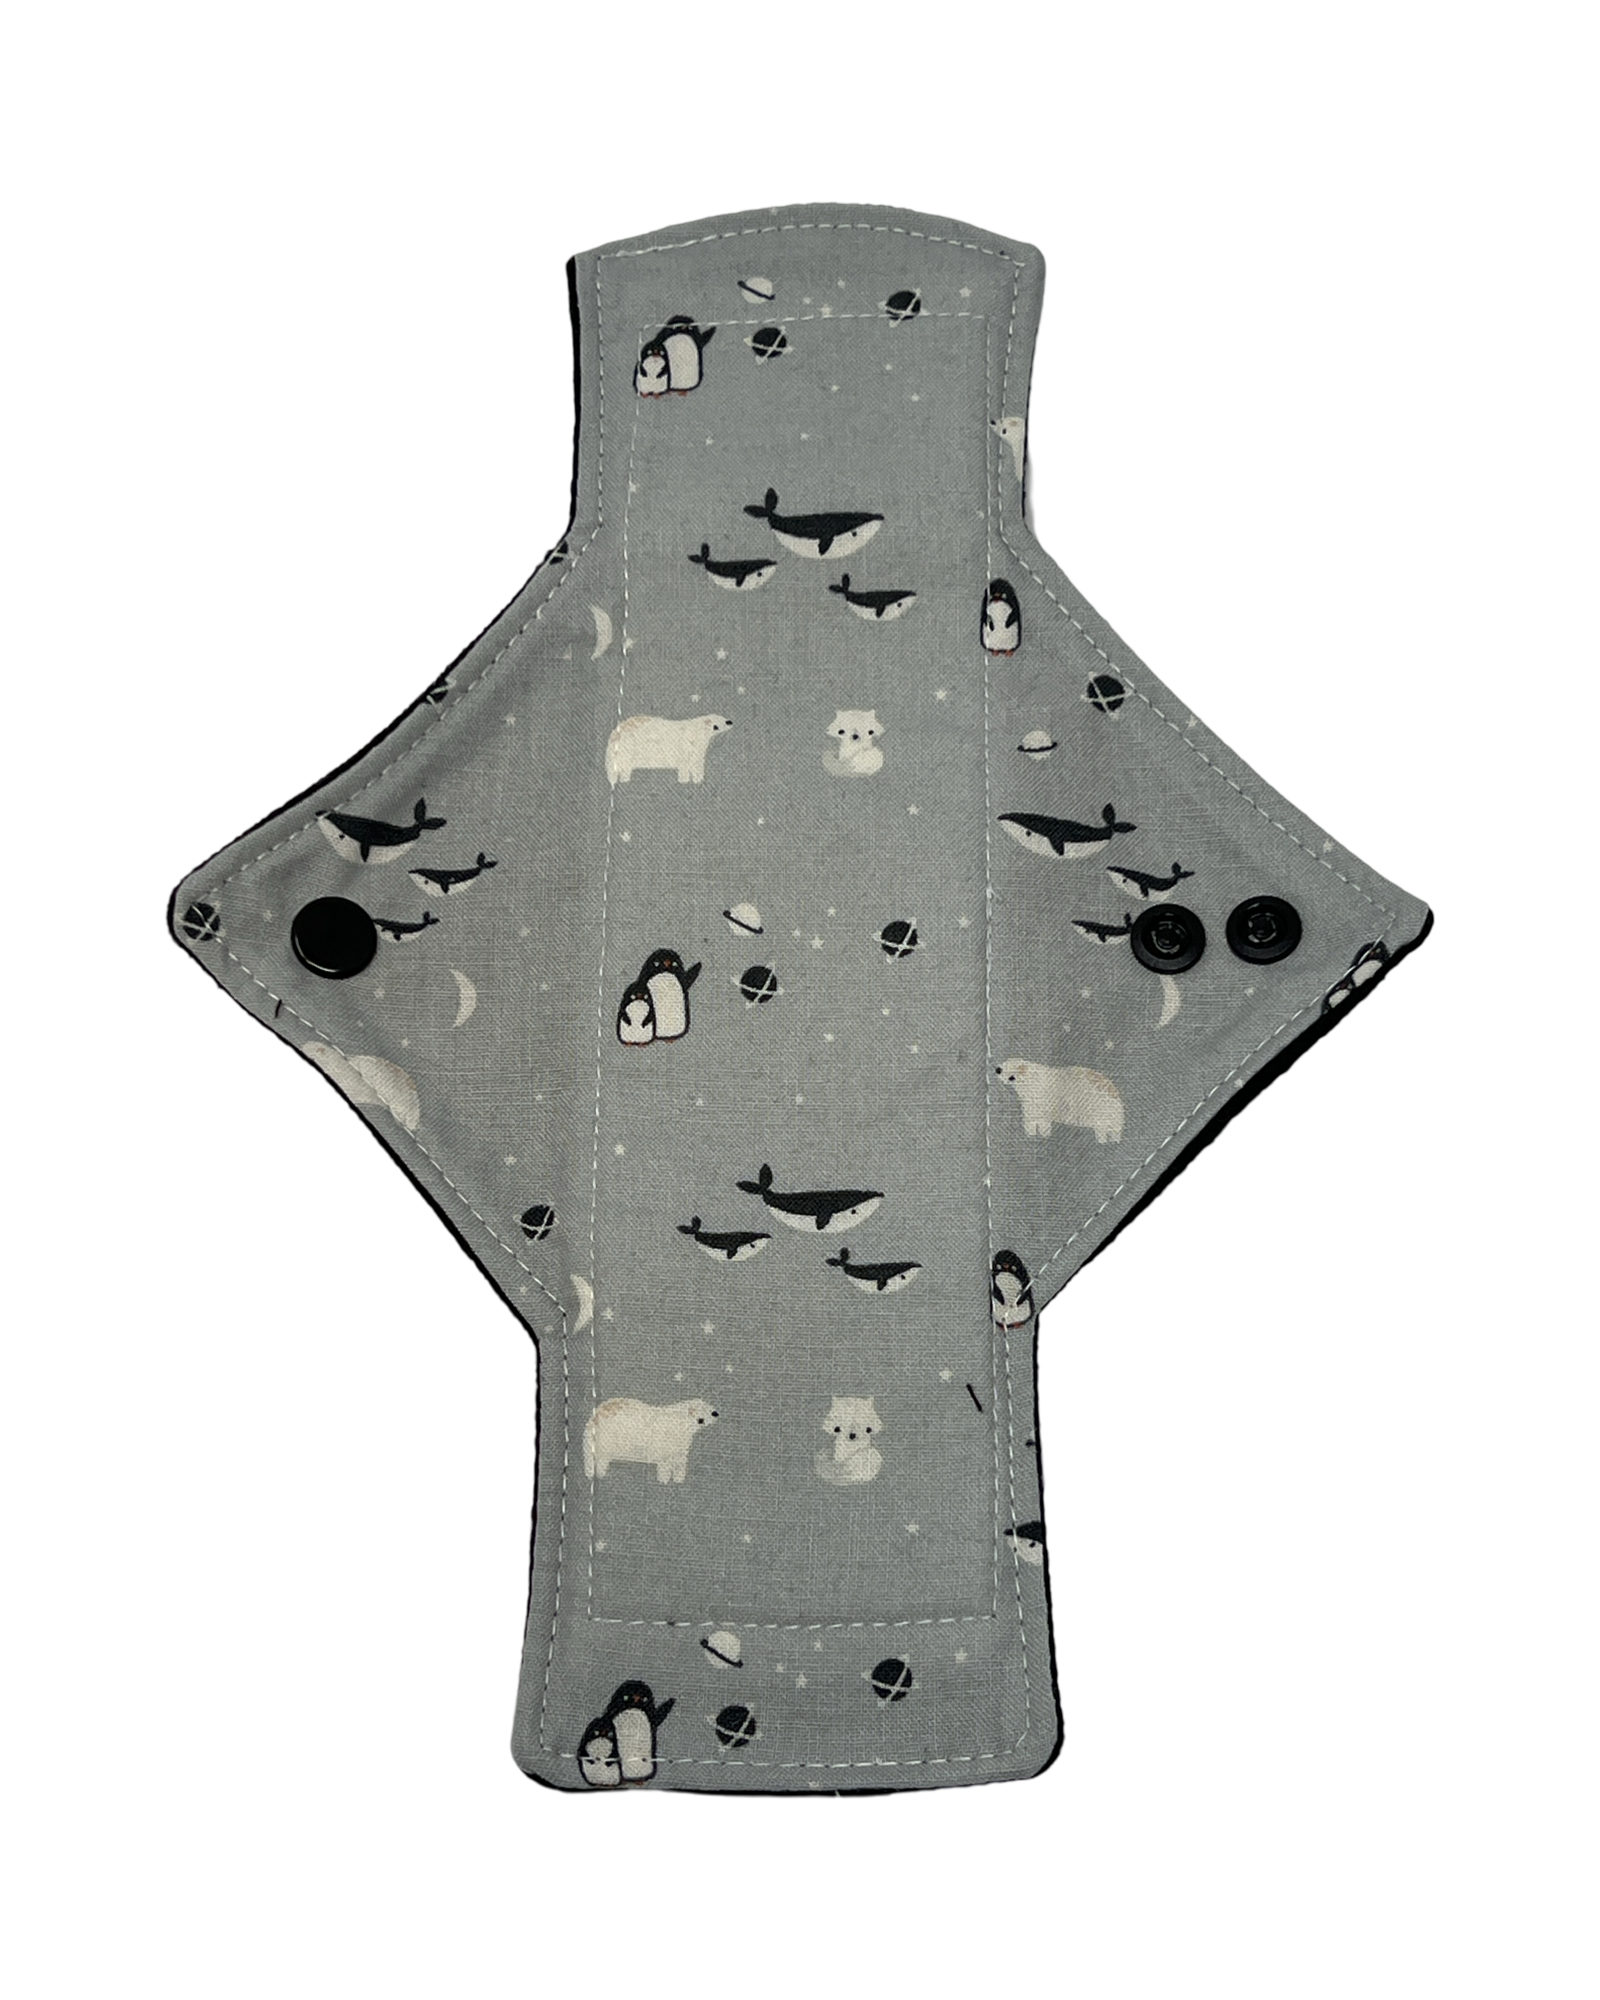 Stash Dash Event 2023 - Backed with Softshell Fleece Polar Opposites Limited Edition Cotton Single Light Flow Day Pad - Tree Hugger Cloth Pads